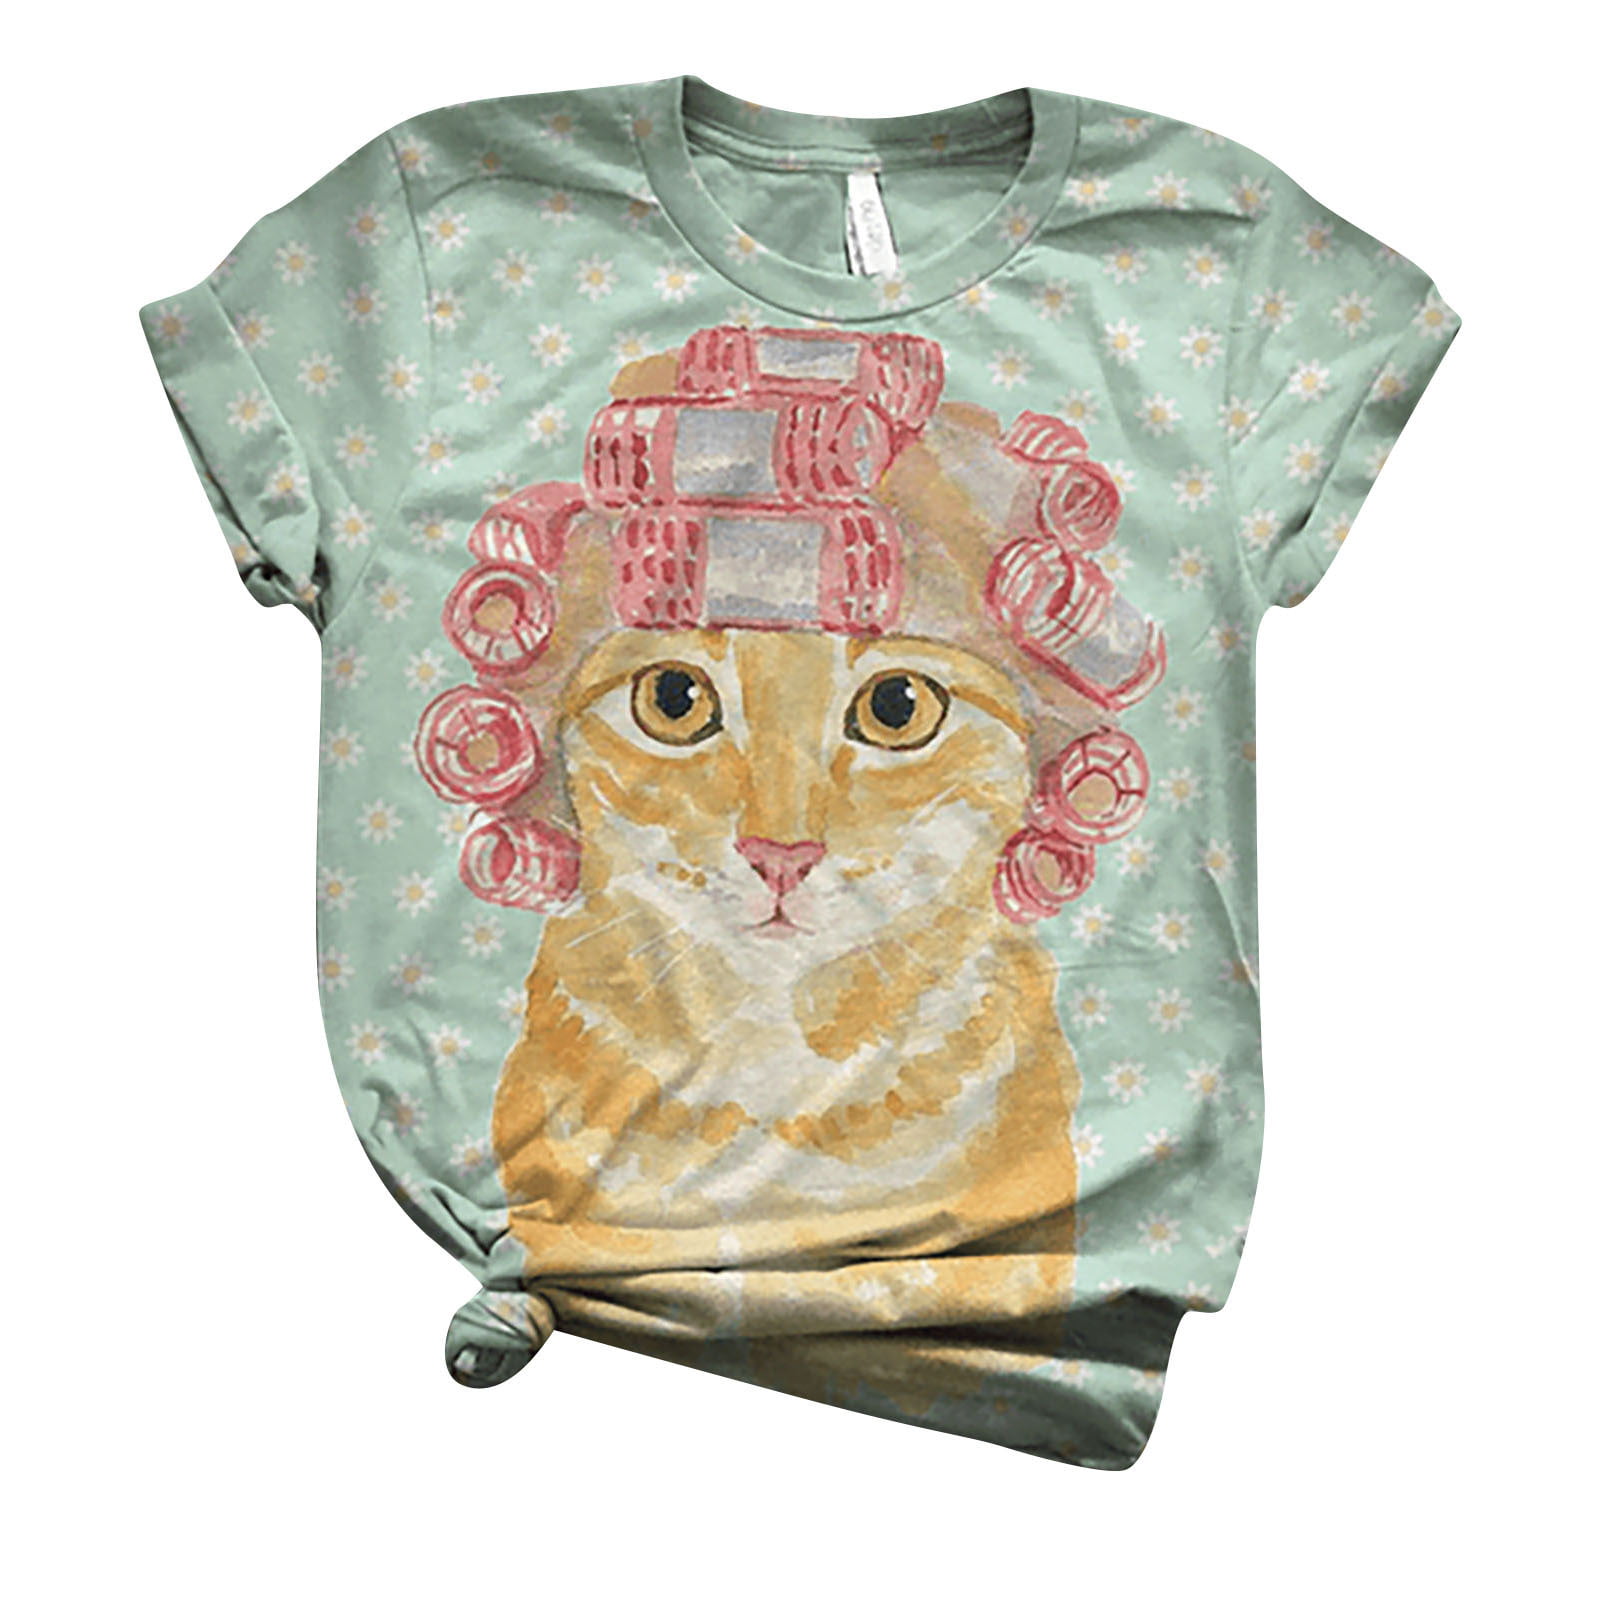 Womens T Shirt Casual Cat Short Sleeve O-Neck Graphic T-Shirt Tops Tees 